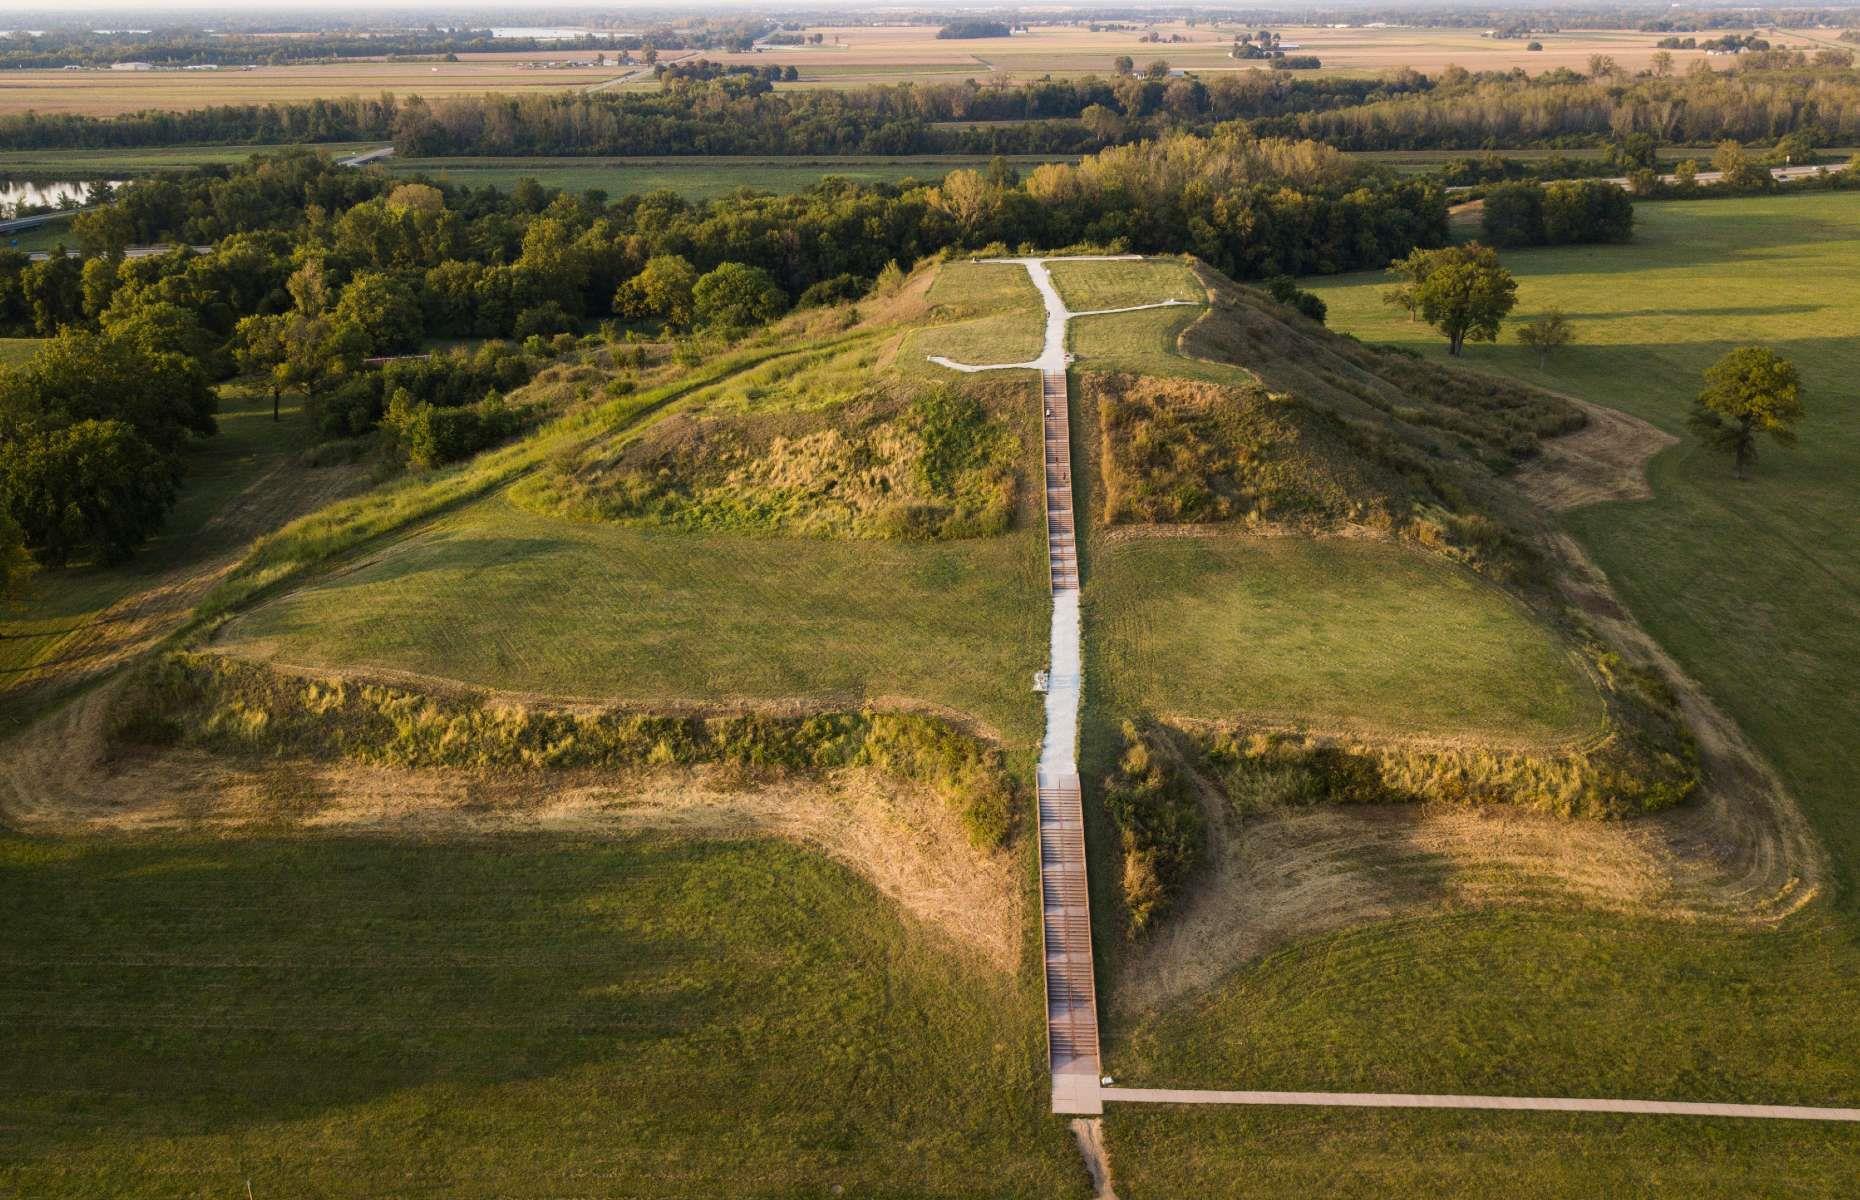 <p>Spread over 2,200 acres, <a href="https://cahokiamounds.org/">this site in western Illinois</a> dating back to AD 700 is the largest pre-Columbian site north of Mexico. It’s thought that Cahokia, once larger than contemporary London, was home to around 120 mounds, with its 'golden age' spanning from AD 1100 to 1200. Today, visitors can explore prehistoric earthworks including the gargantuan Monks Mound, <a href="https://cahokiamounds.org/mound/mound-38-monks-mound/">which reaches 98 feet</a> (30m) and is thought to be the largest of its kind in the continent. Numerous trails lace between the mounds and guided tours typically run during summer.</p>